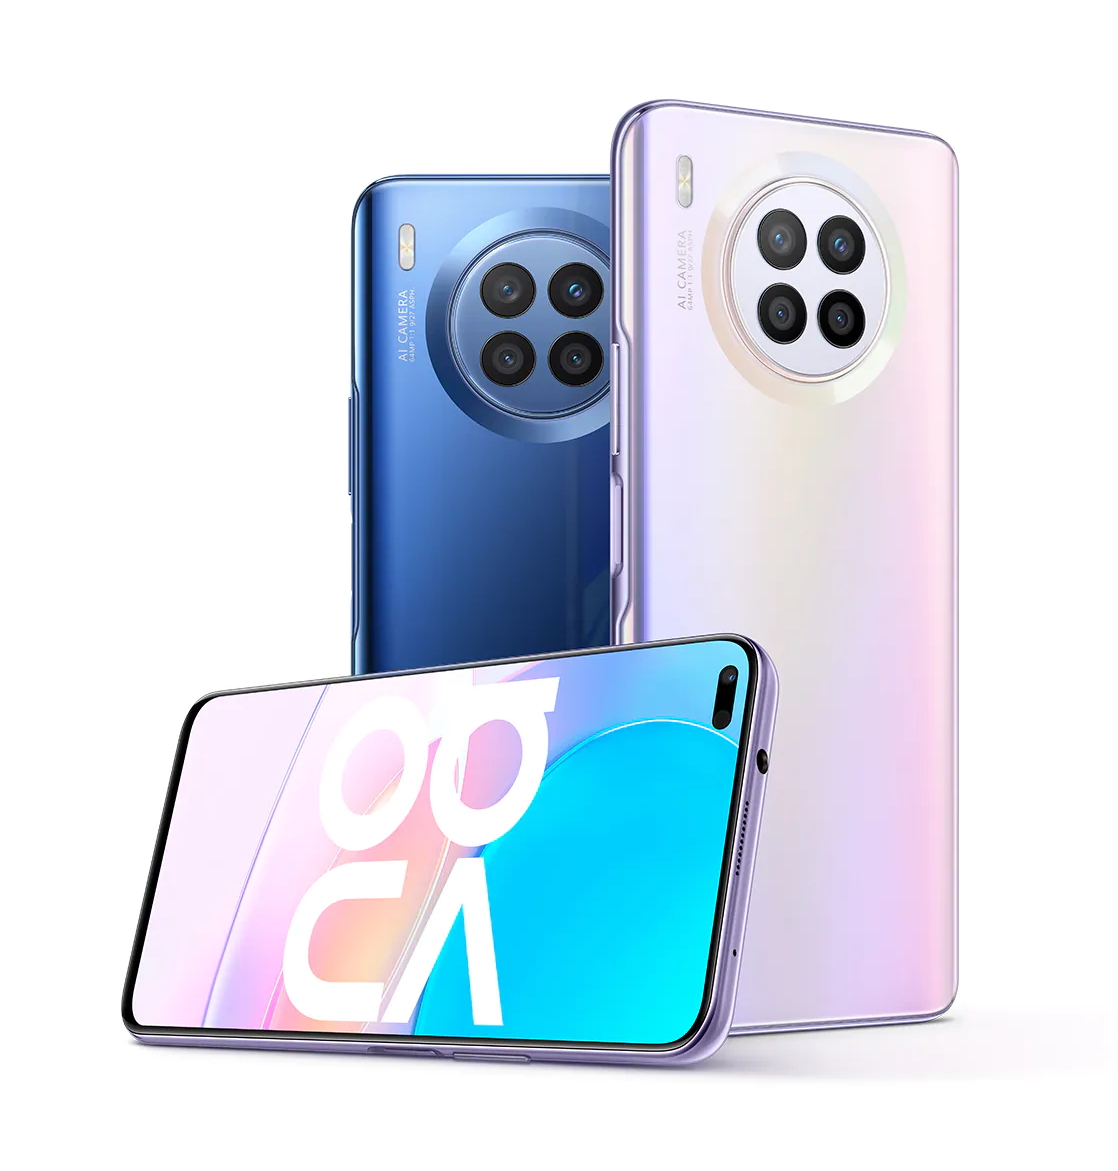 strijd subtiel Terugspoelen Huawei nova 8i launched with Mate 30 series looks and a Snapdragon 662 SoC  - NotebookCheck.net News